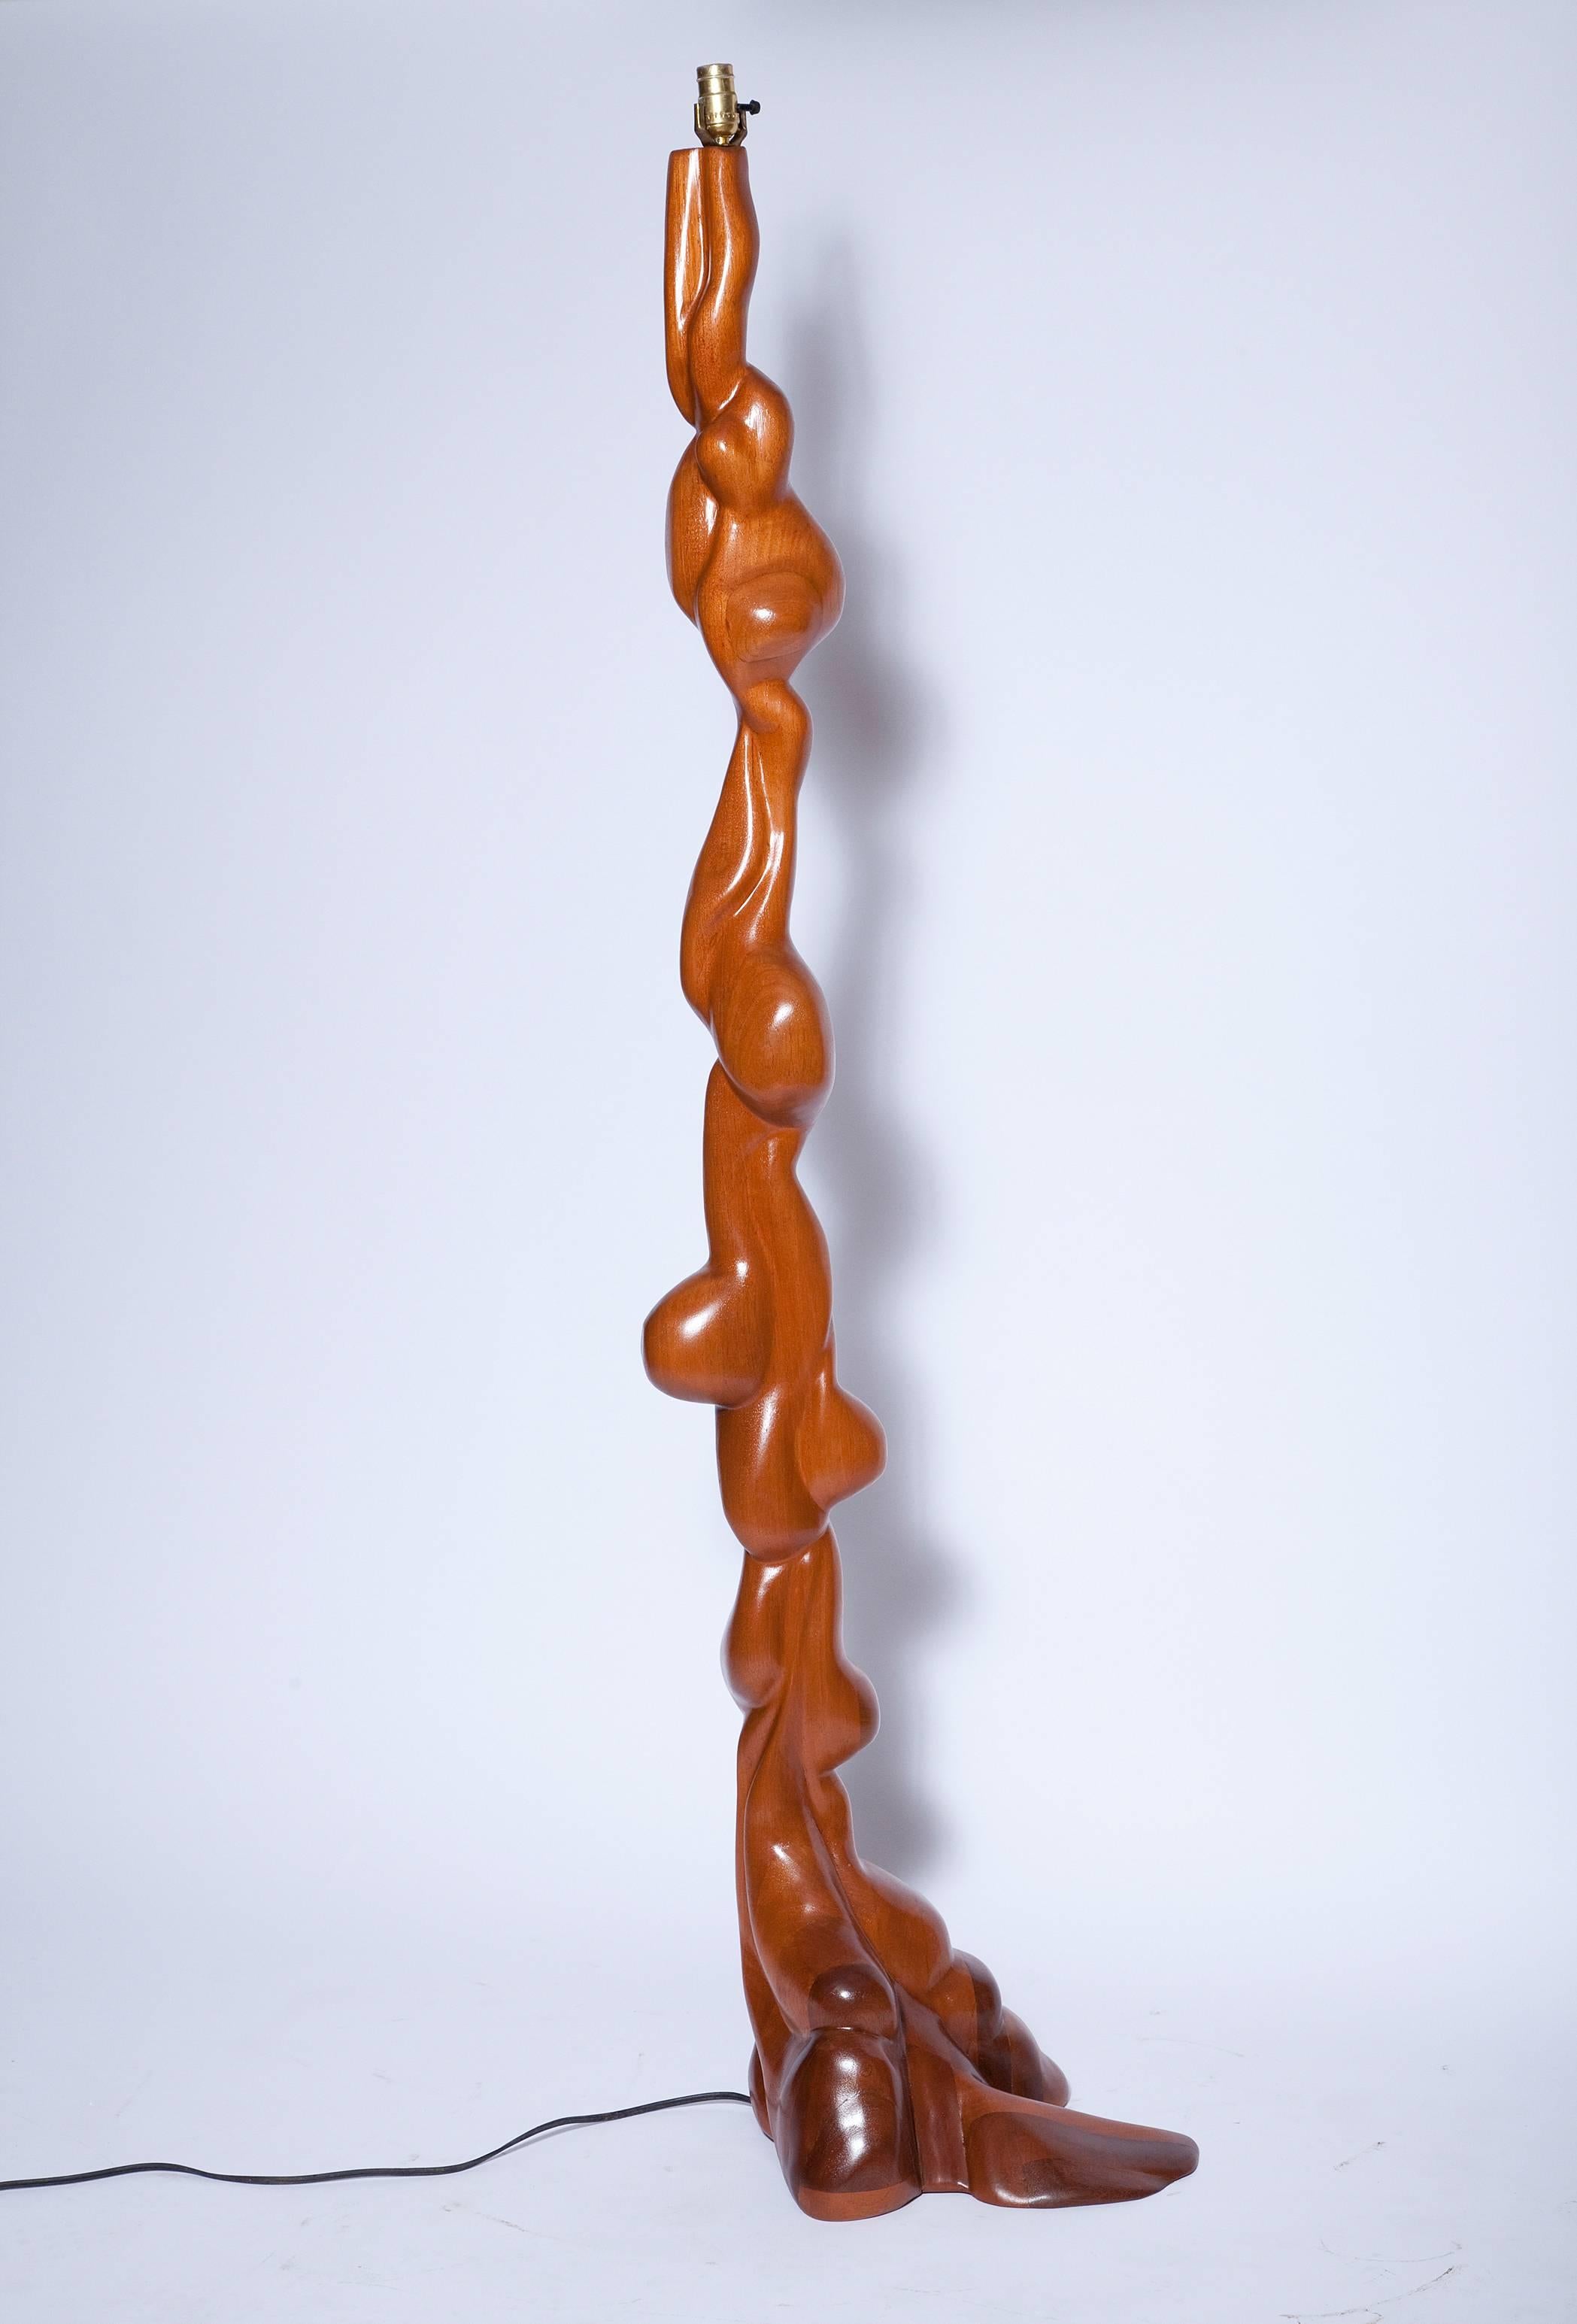 Sharing much of the sculptural fluidity of pieces by Wendell Castle, this spectacular American Craftsman studio floor lamp is painstakingly carved from multiple individually-carved parts, joined as a whole. Excellent restored condition with original